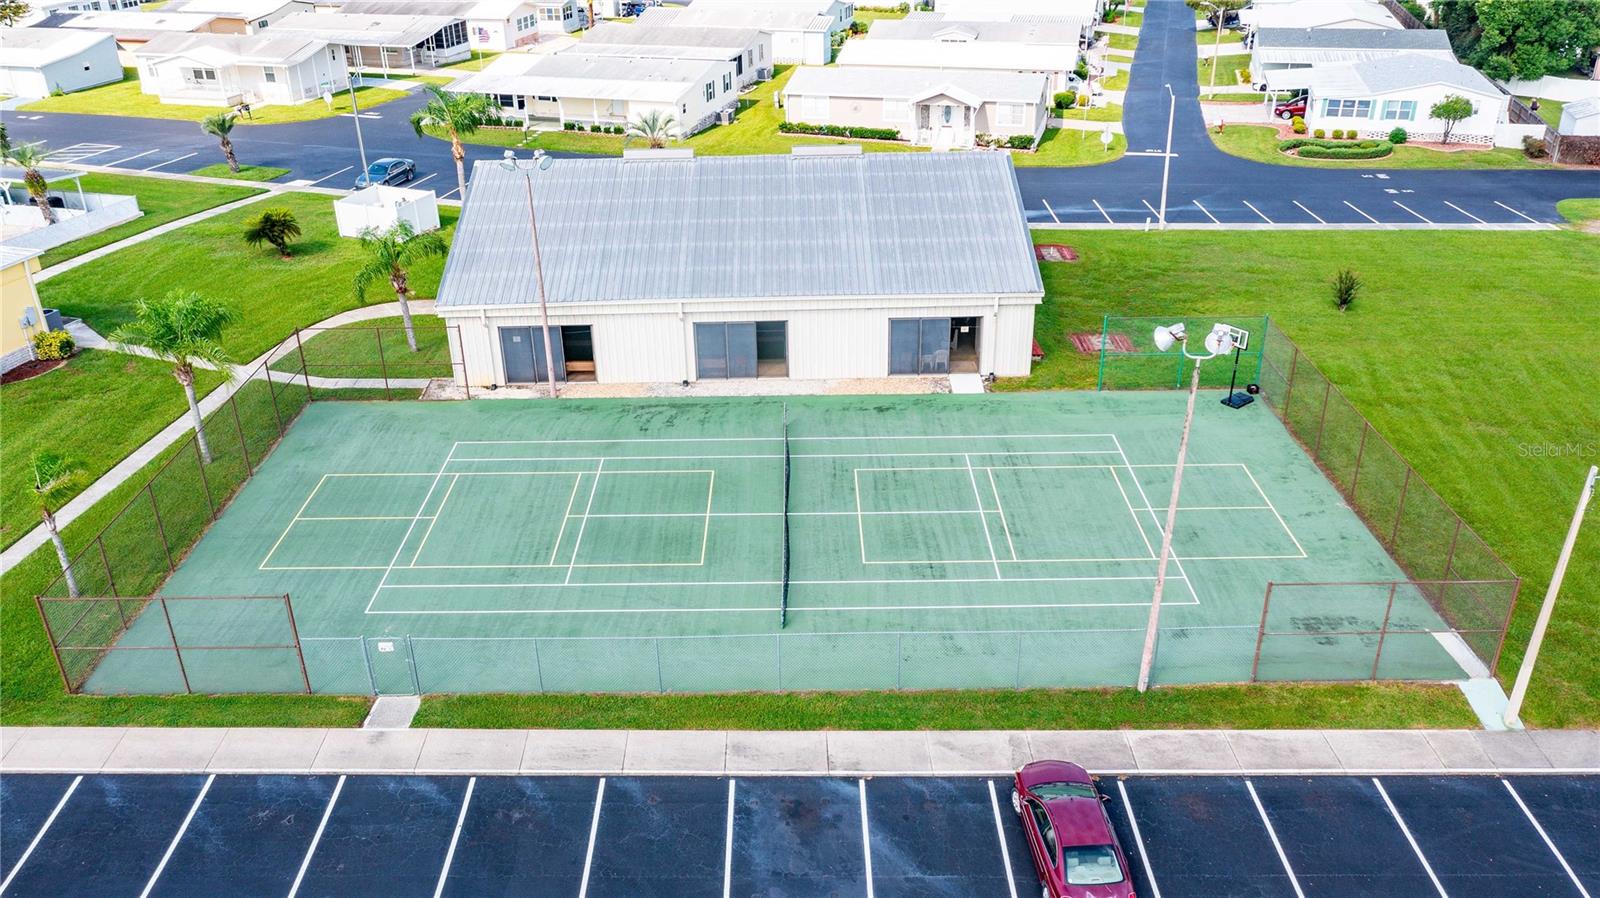 Tennis and pickleball in this community.